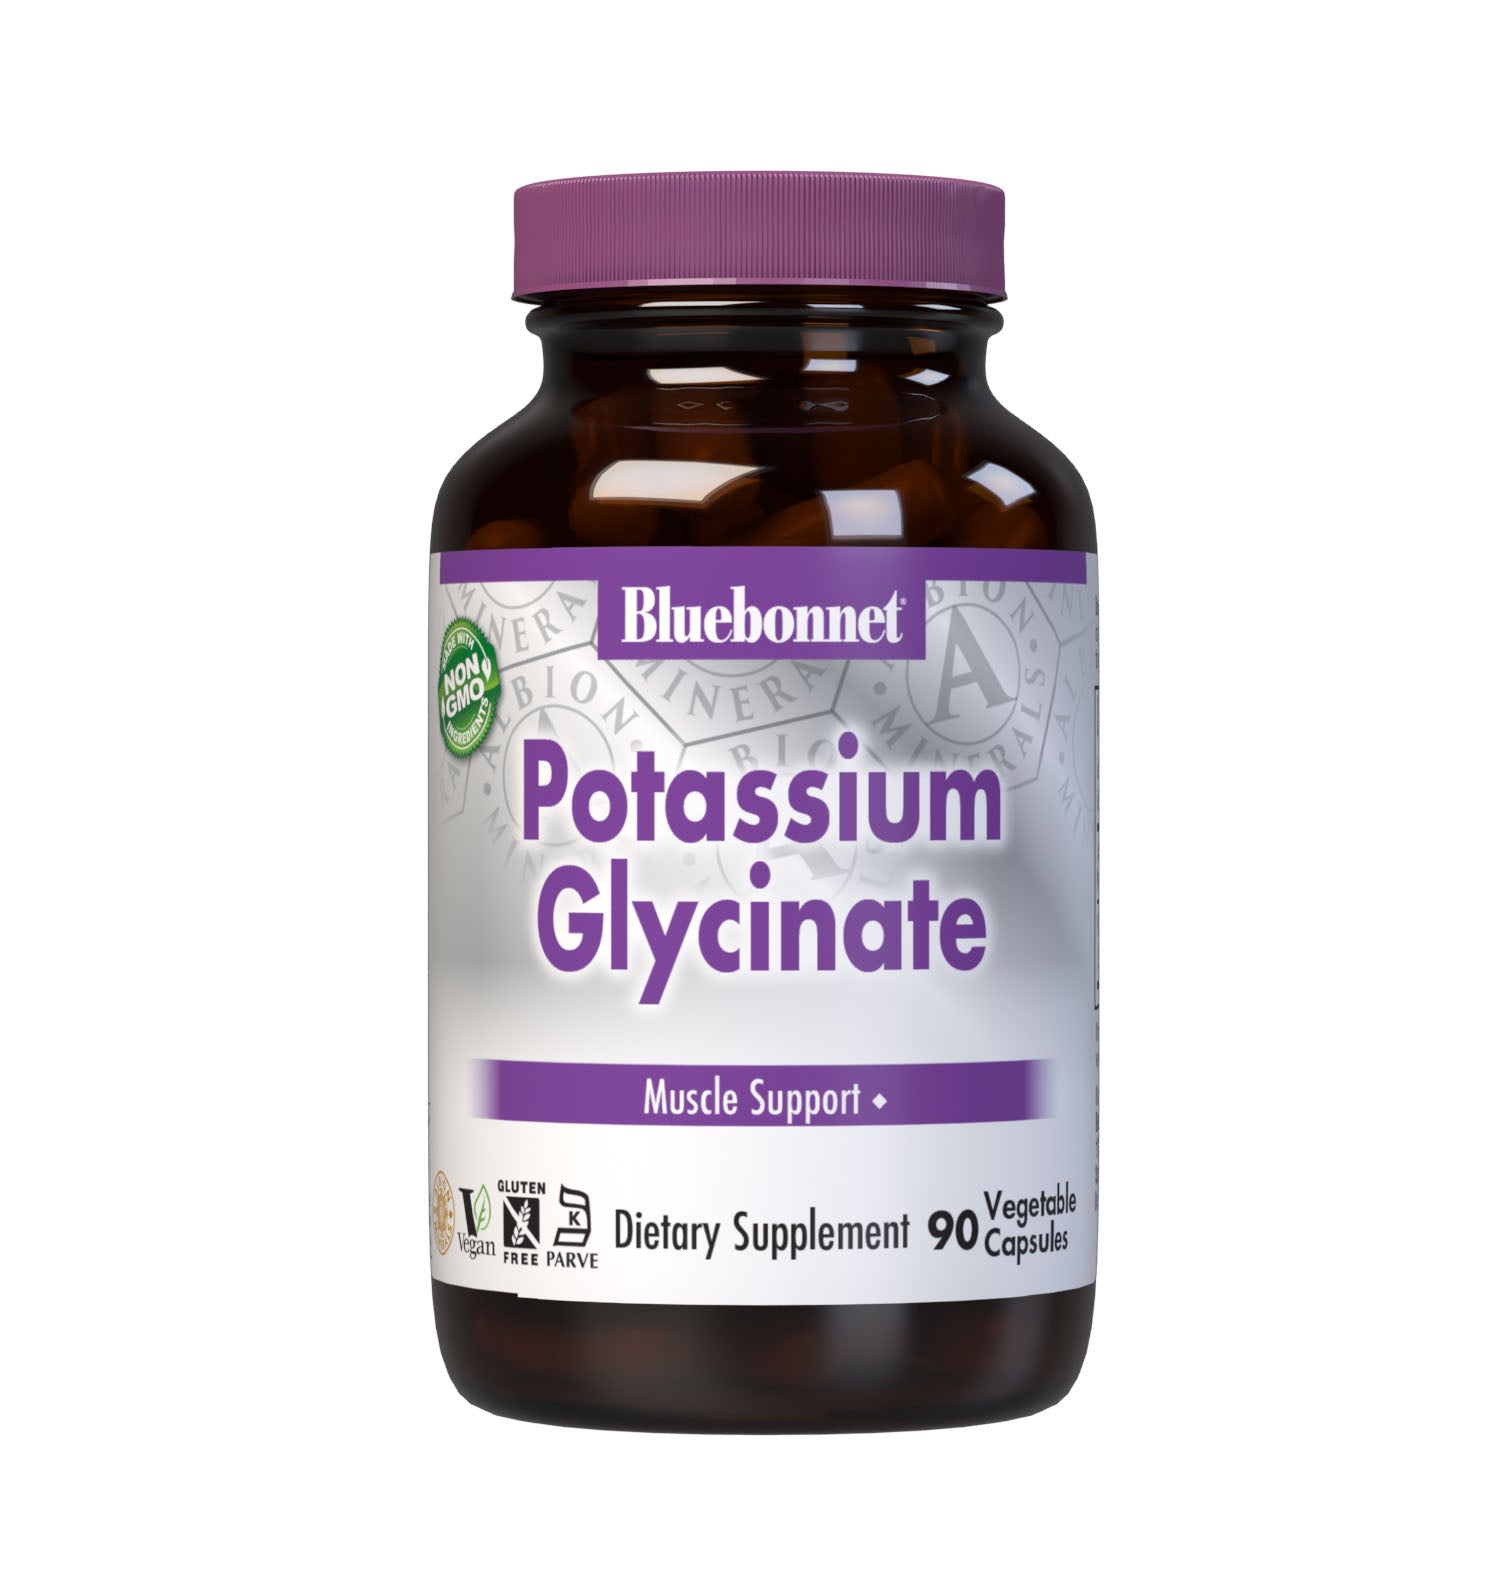 Bluebonnet's Potassium Glycinate 90 Vegetable Capsules are formulated with 99 mg of elemental potassium per serving from a low molecular weight glycinate amino acid complex from Albion. Potassium is an essential element that is necessary for electrolyte balance as well as muscle strength, repair and recovery. #size_90 count